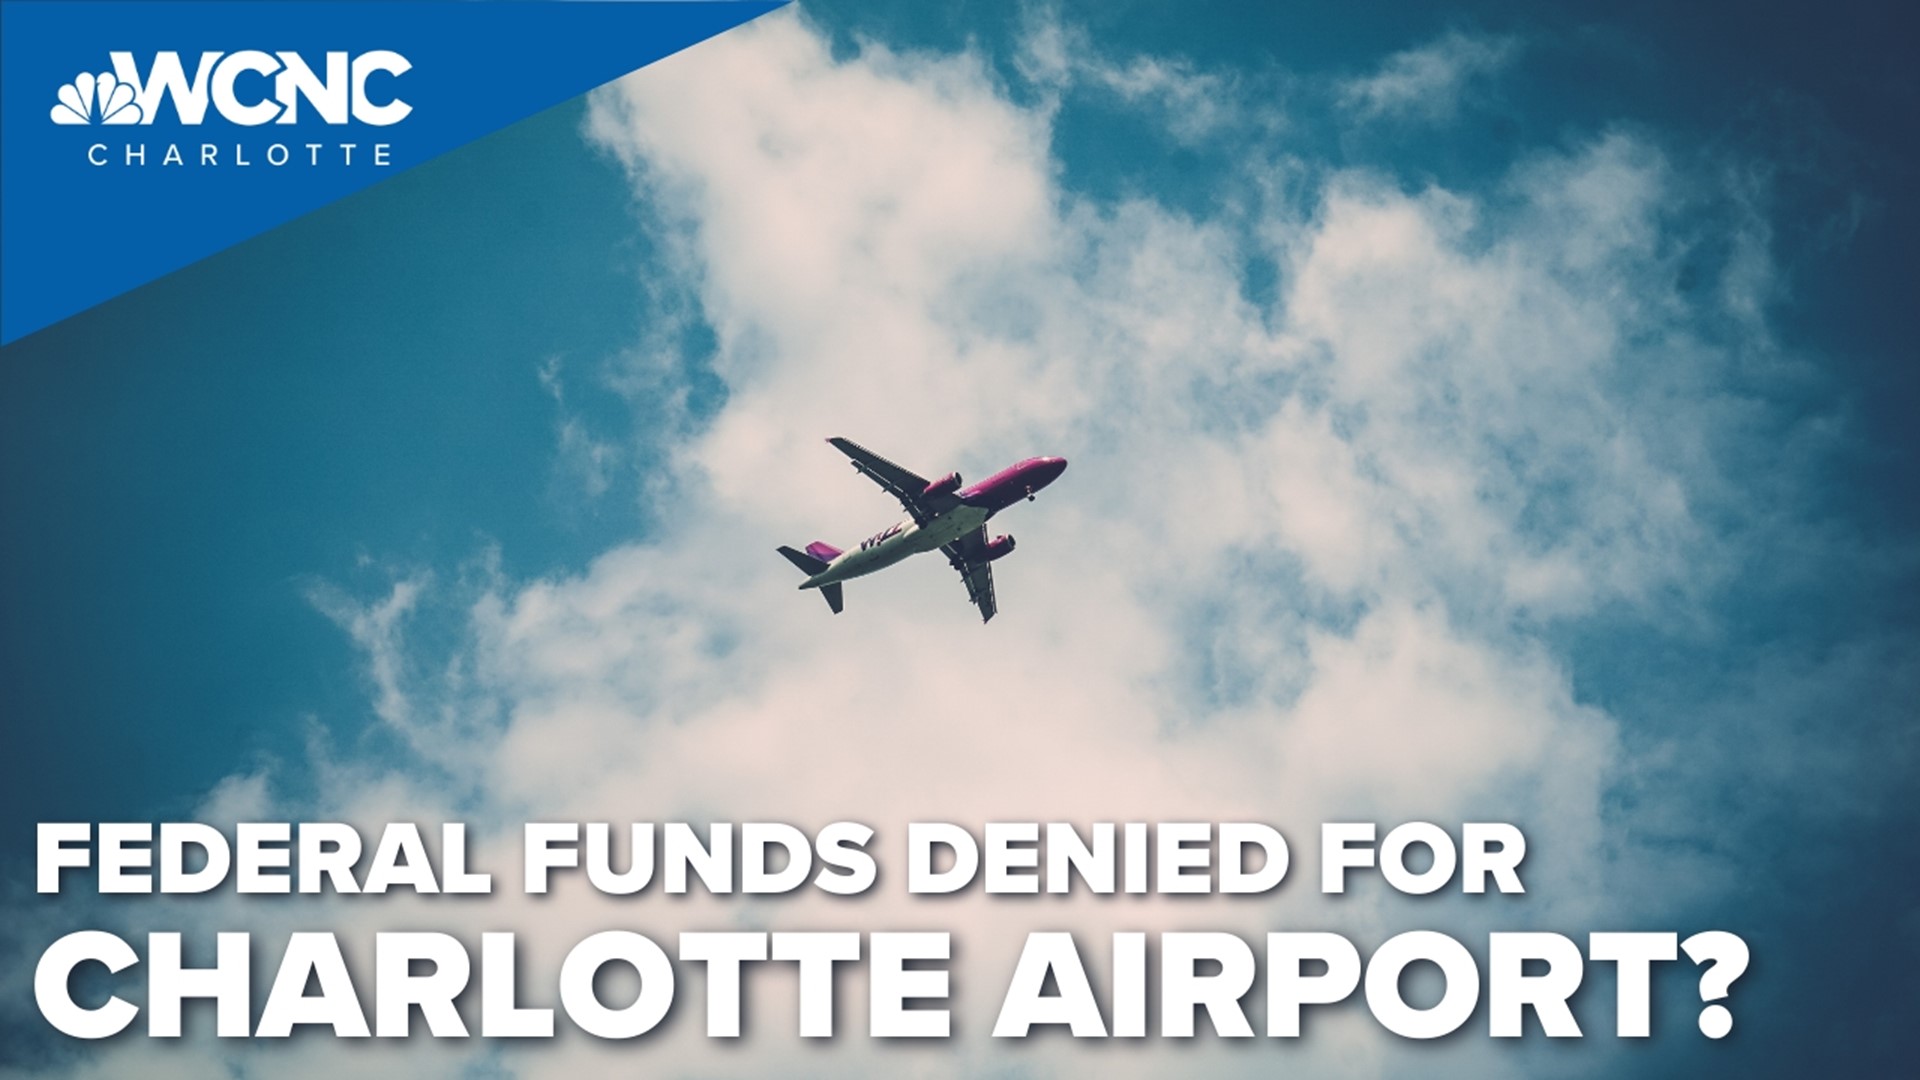 Airport officials said they were unsure why they didn't get any funds from an infrastructure grant.